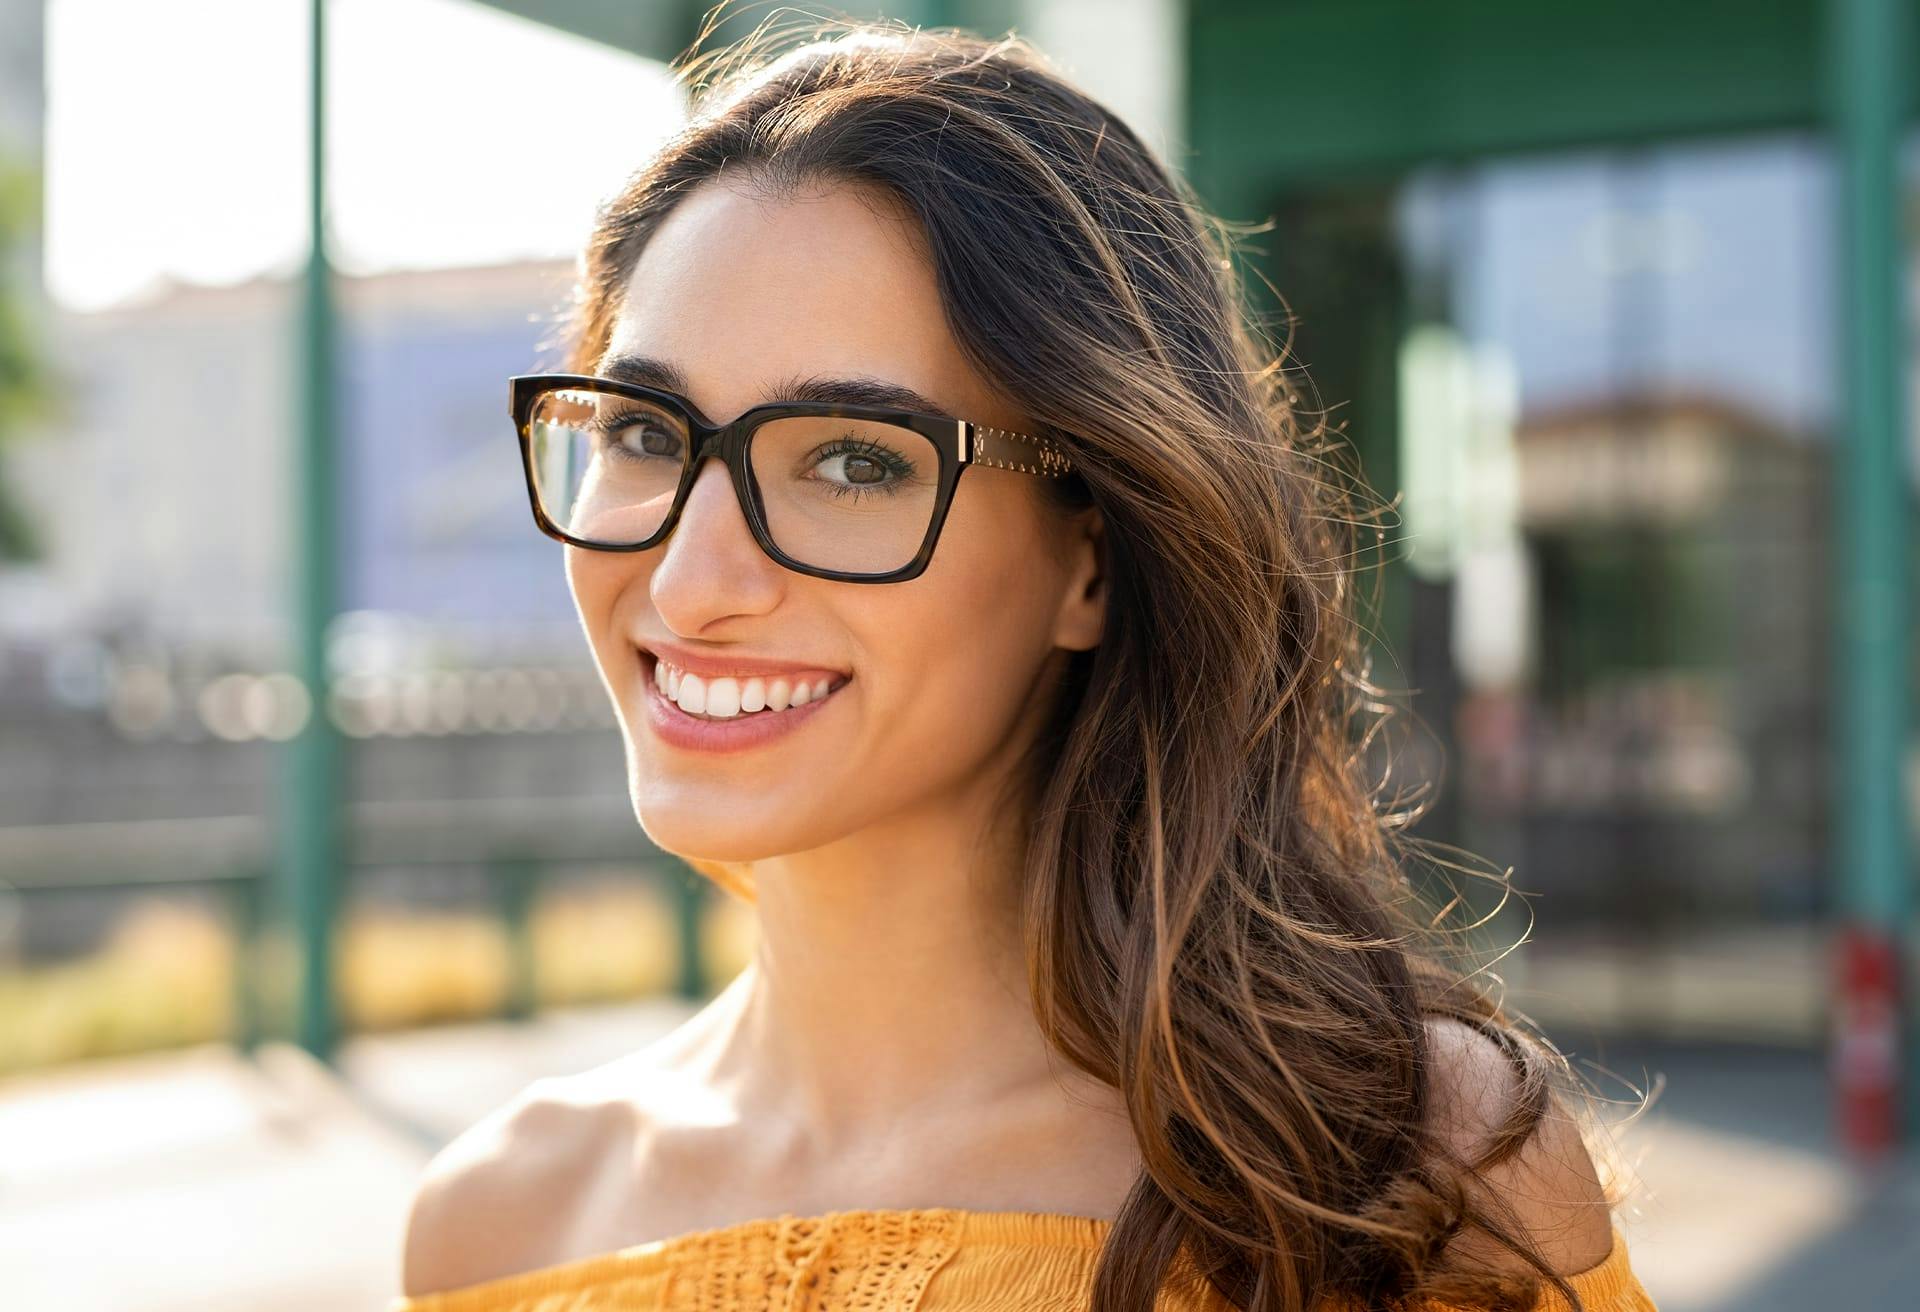 Woman with Glasses Smiling